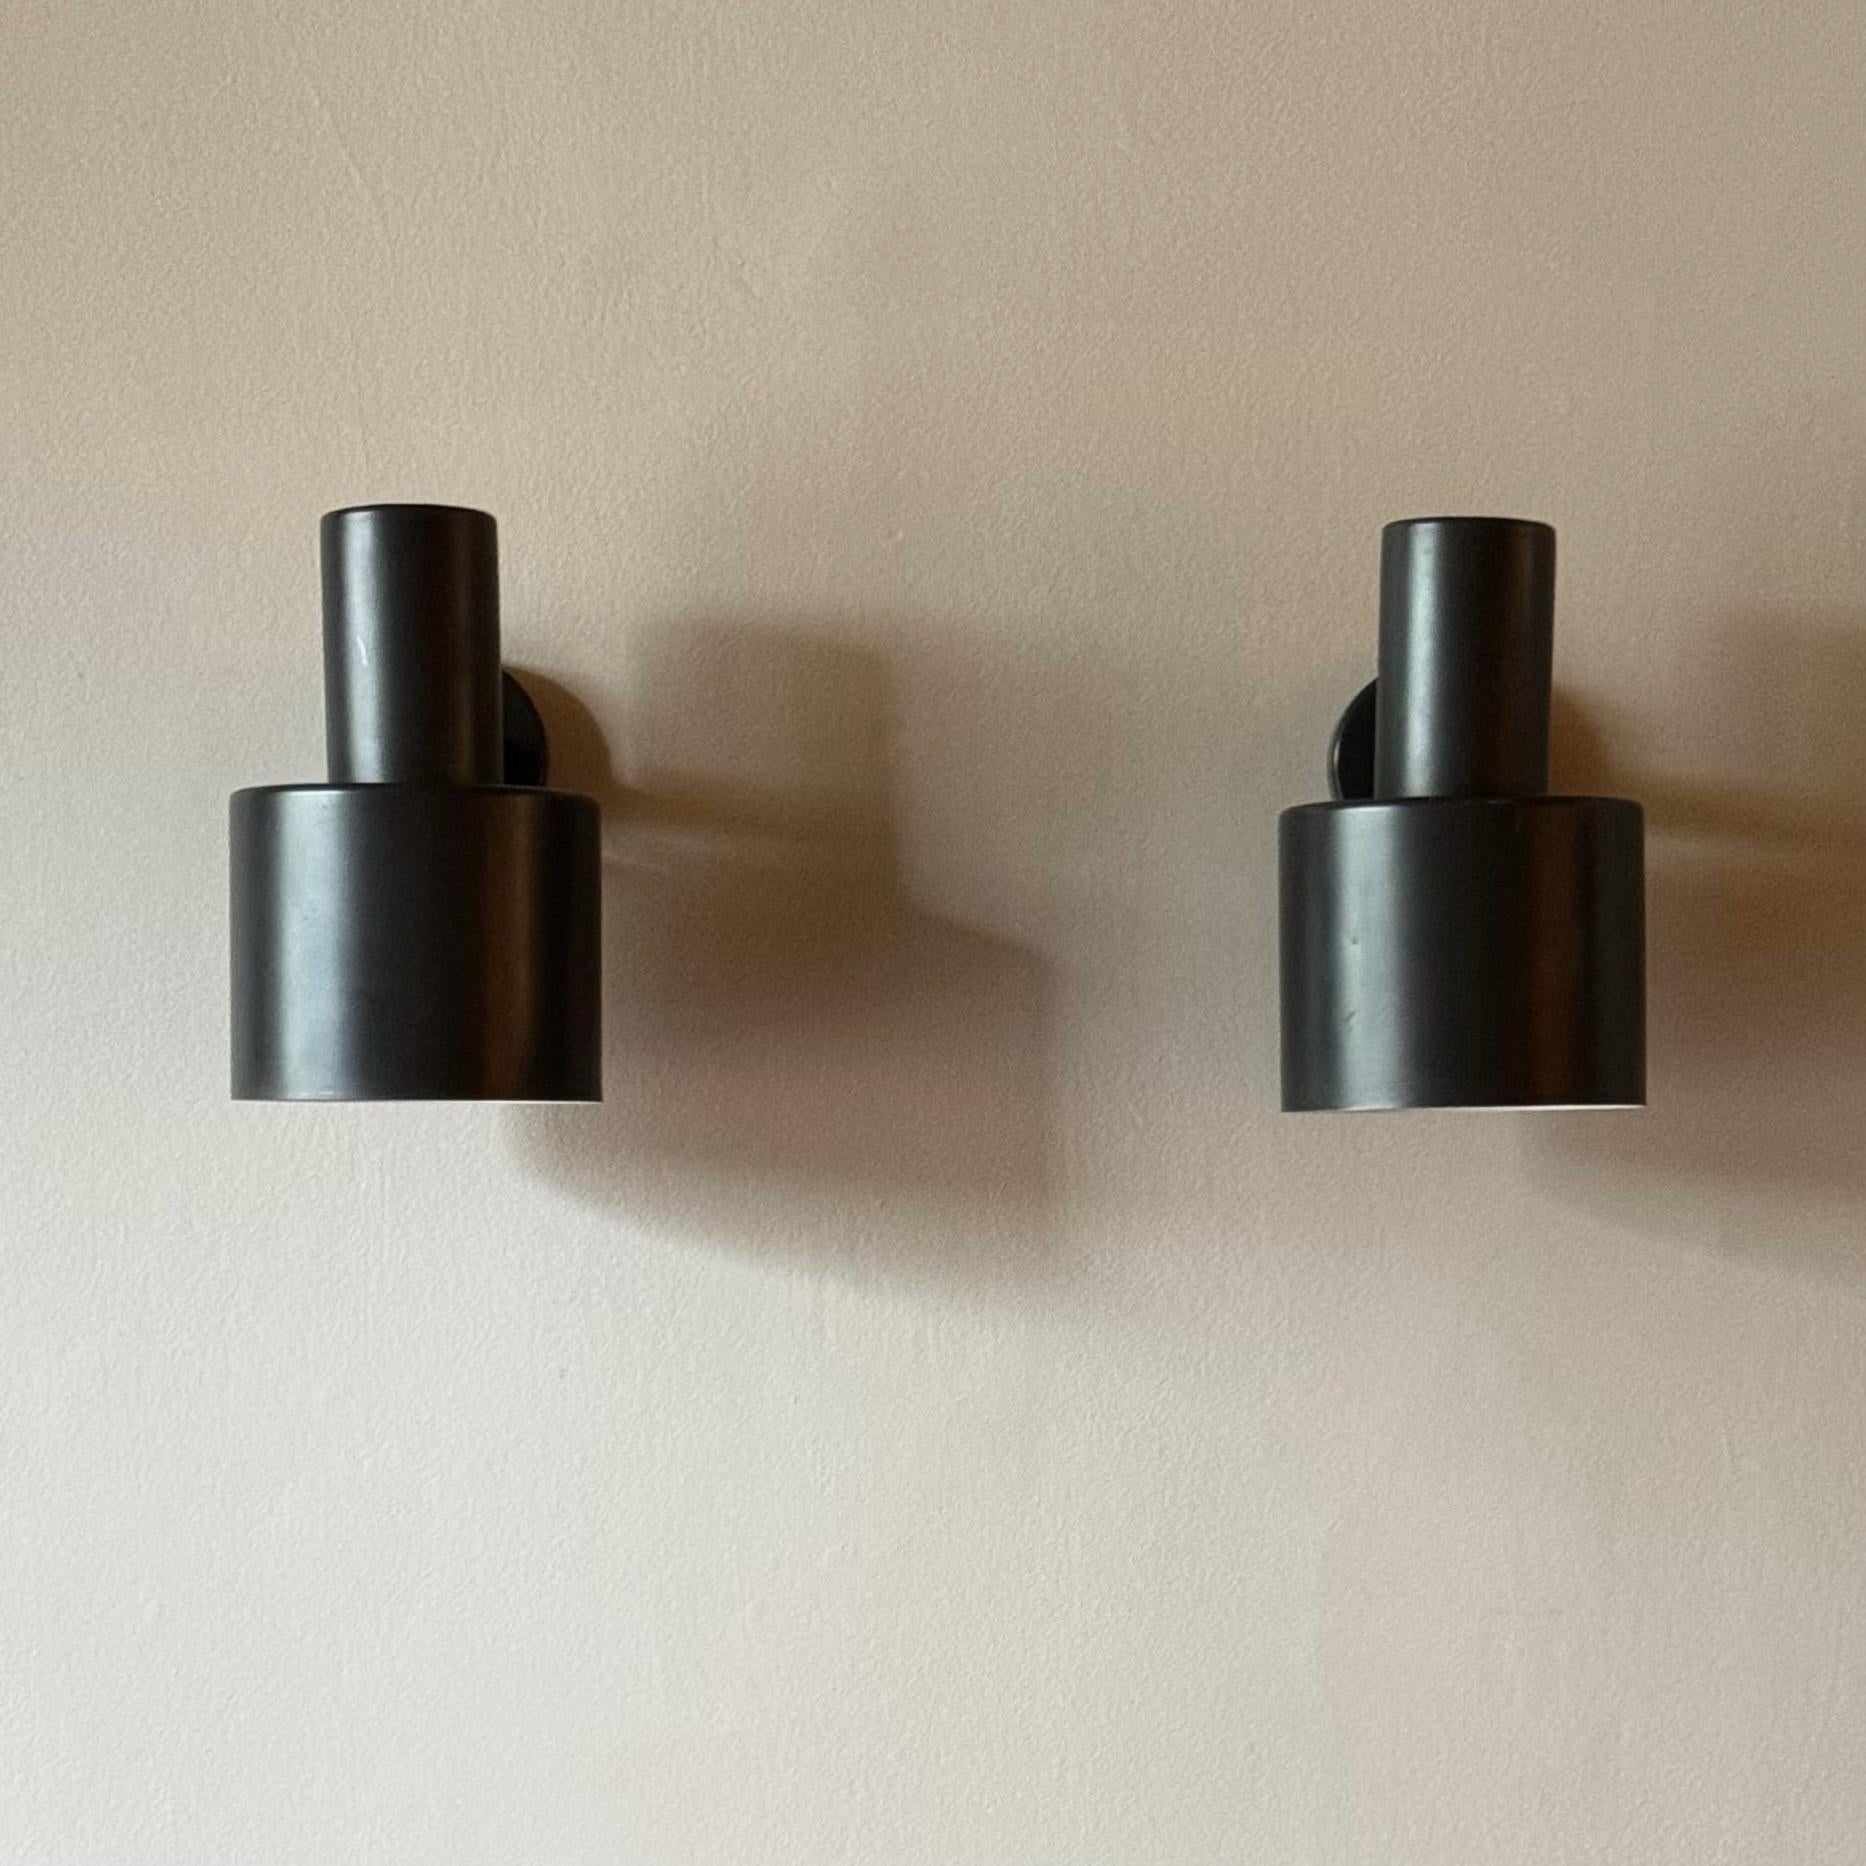 A pair of Model 13-017 Wall Lights designed by Lisa Johansson-Pape and manufactured by Orno in Finland during the 1960s. As one of Finland's leading lighting designers of the twentieth century, Johansson-Pape was a crucial figure in promoting